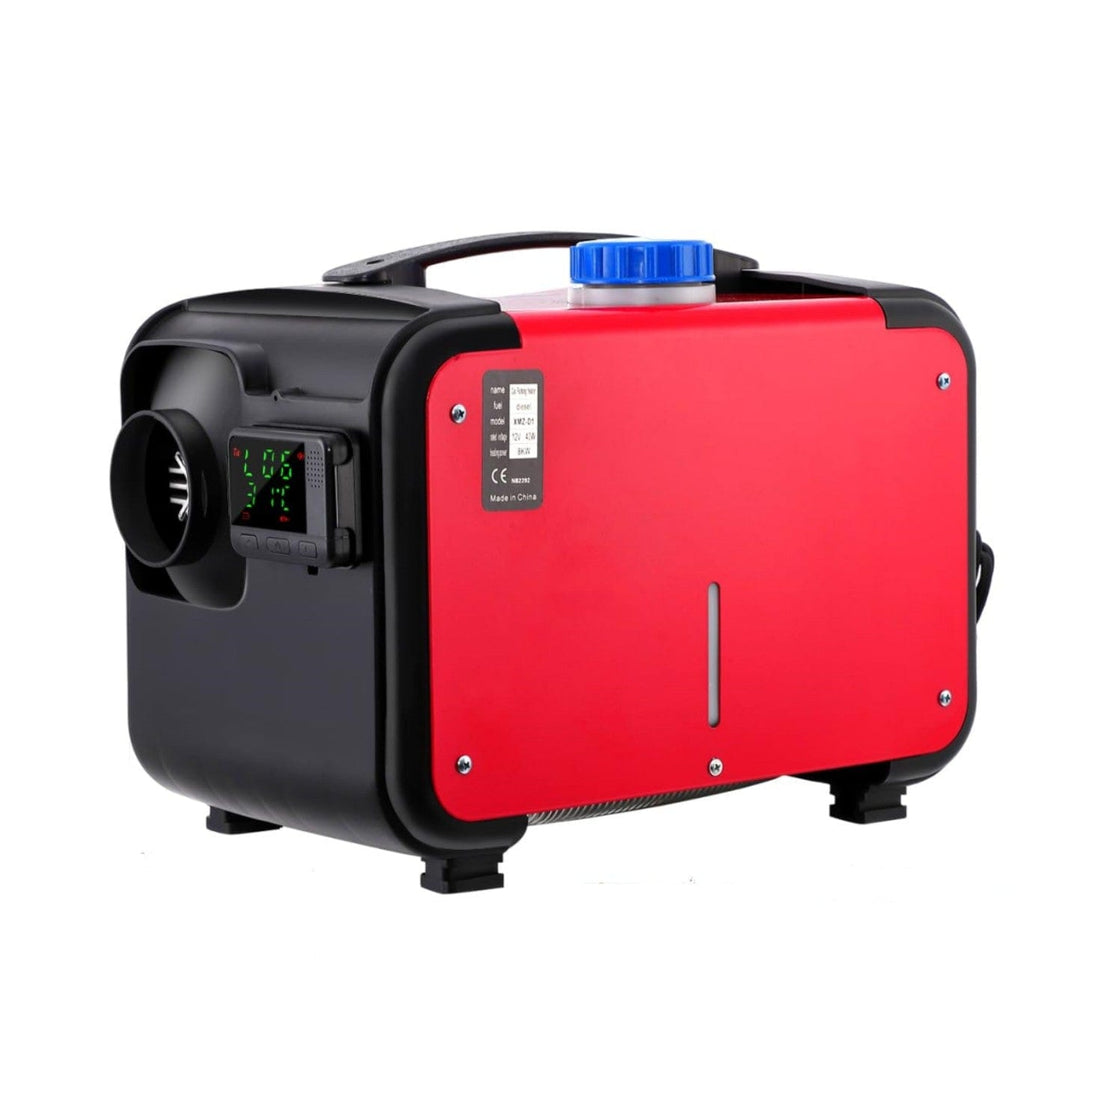 8KW 12V 5L Diesel Heater with LCD for Parking & Camping